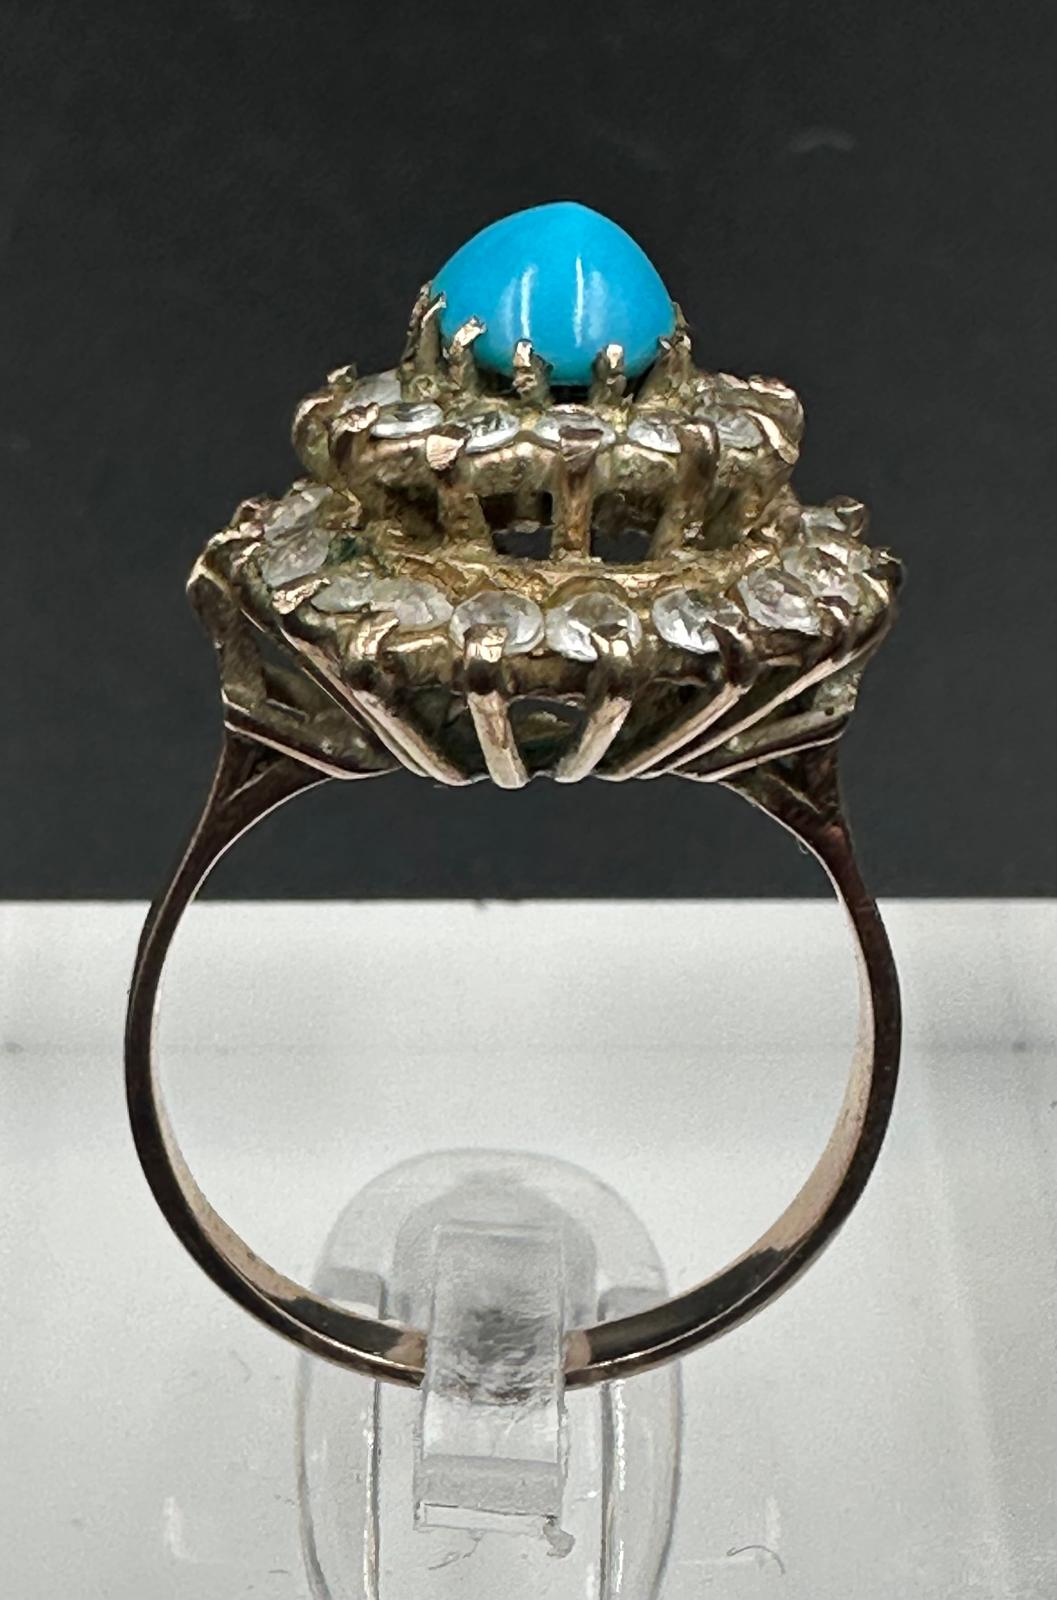 A turquoise central stone ring surrounded by clear stones on gold metal setting. - Image 3 of 3